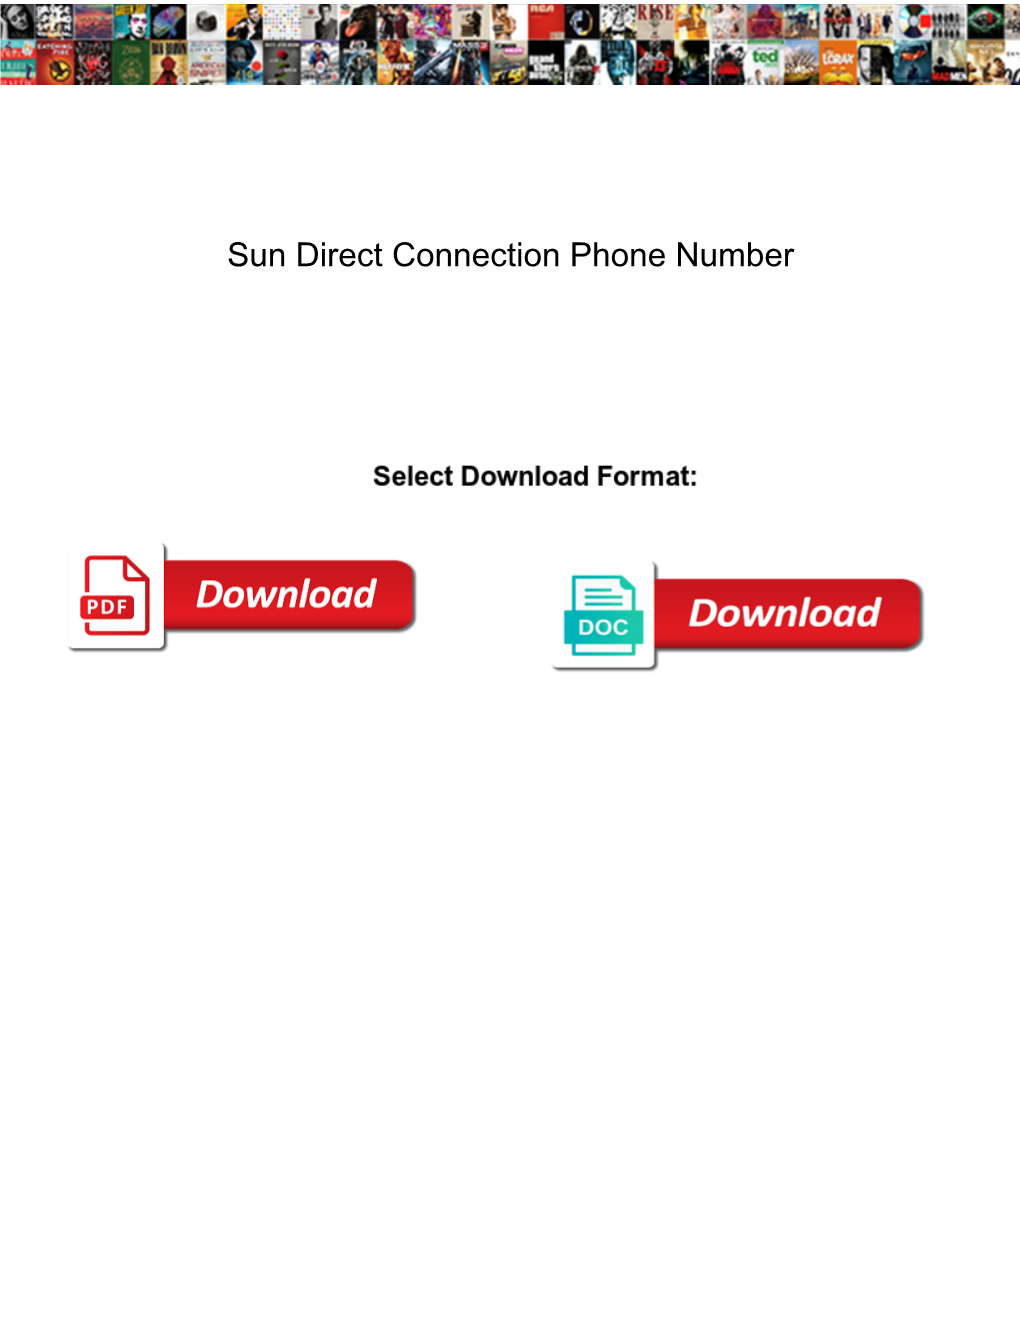 Sun Direct Connection Phone Number